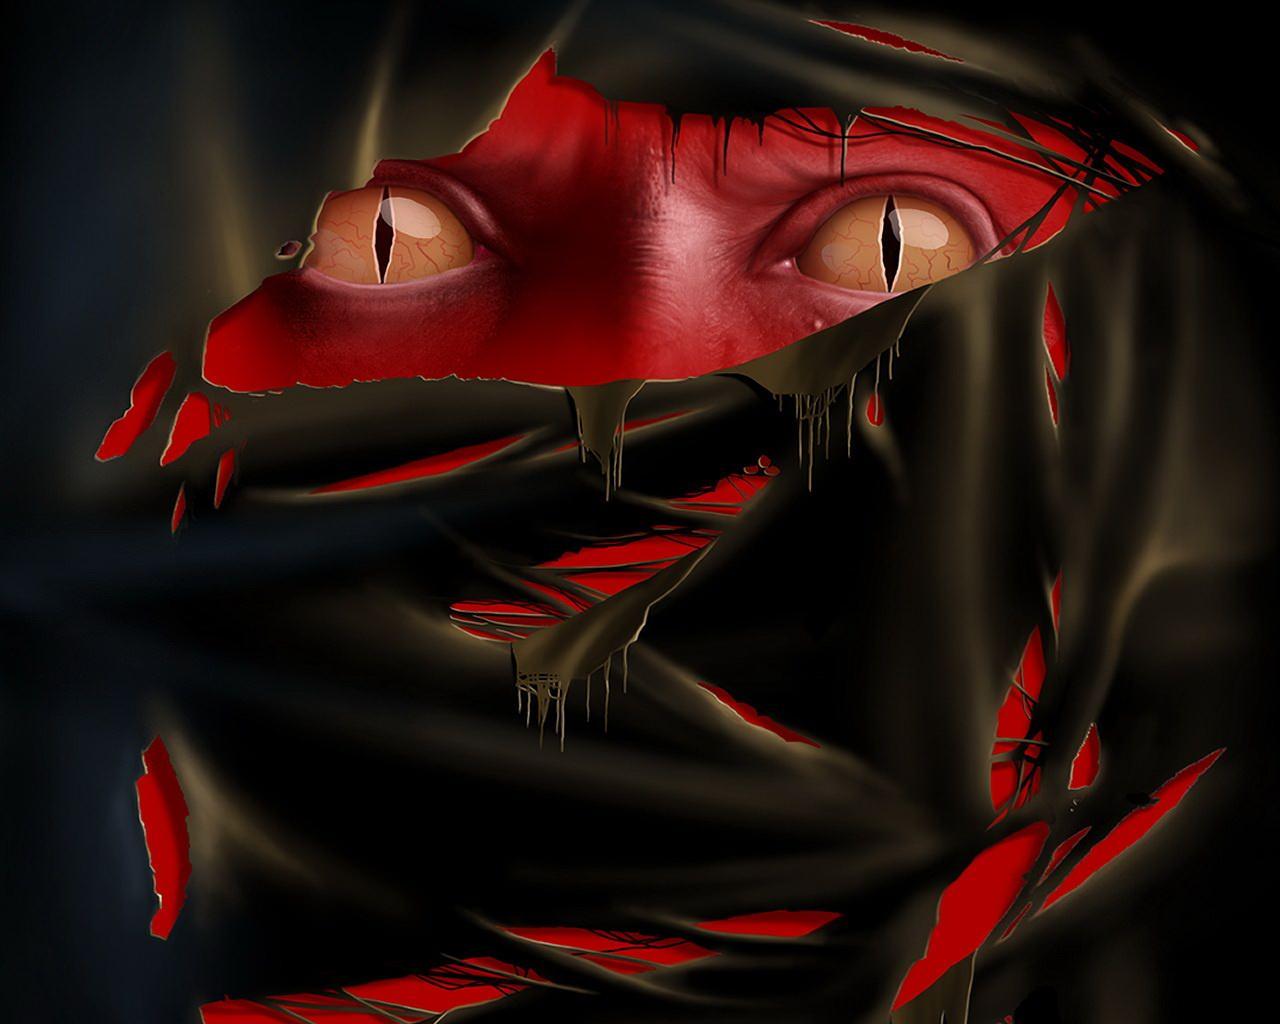 See through Red Eyes wallpaper from Eyes wallpaper